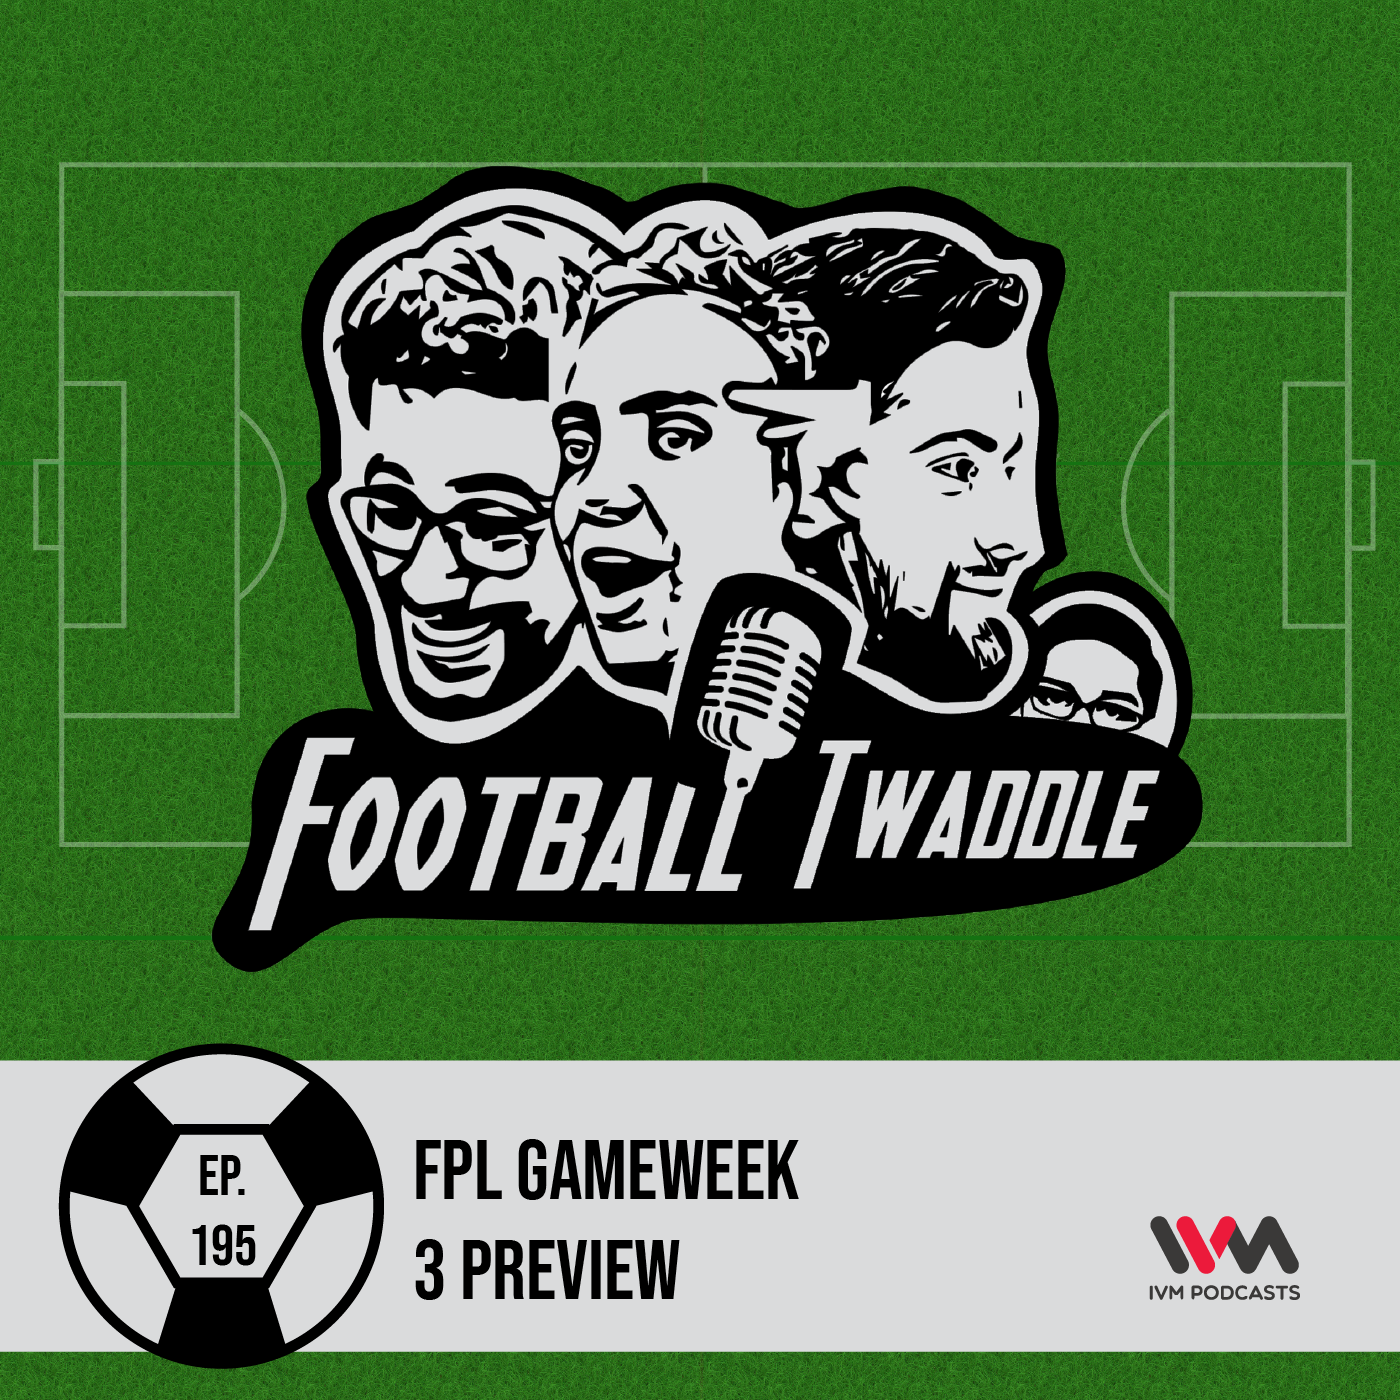 FPL Gameweek 3 Preview